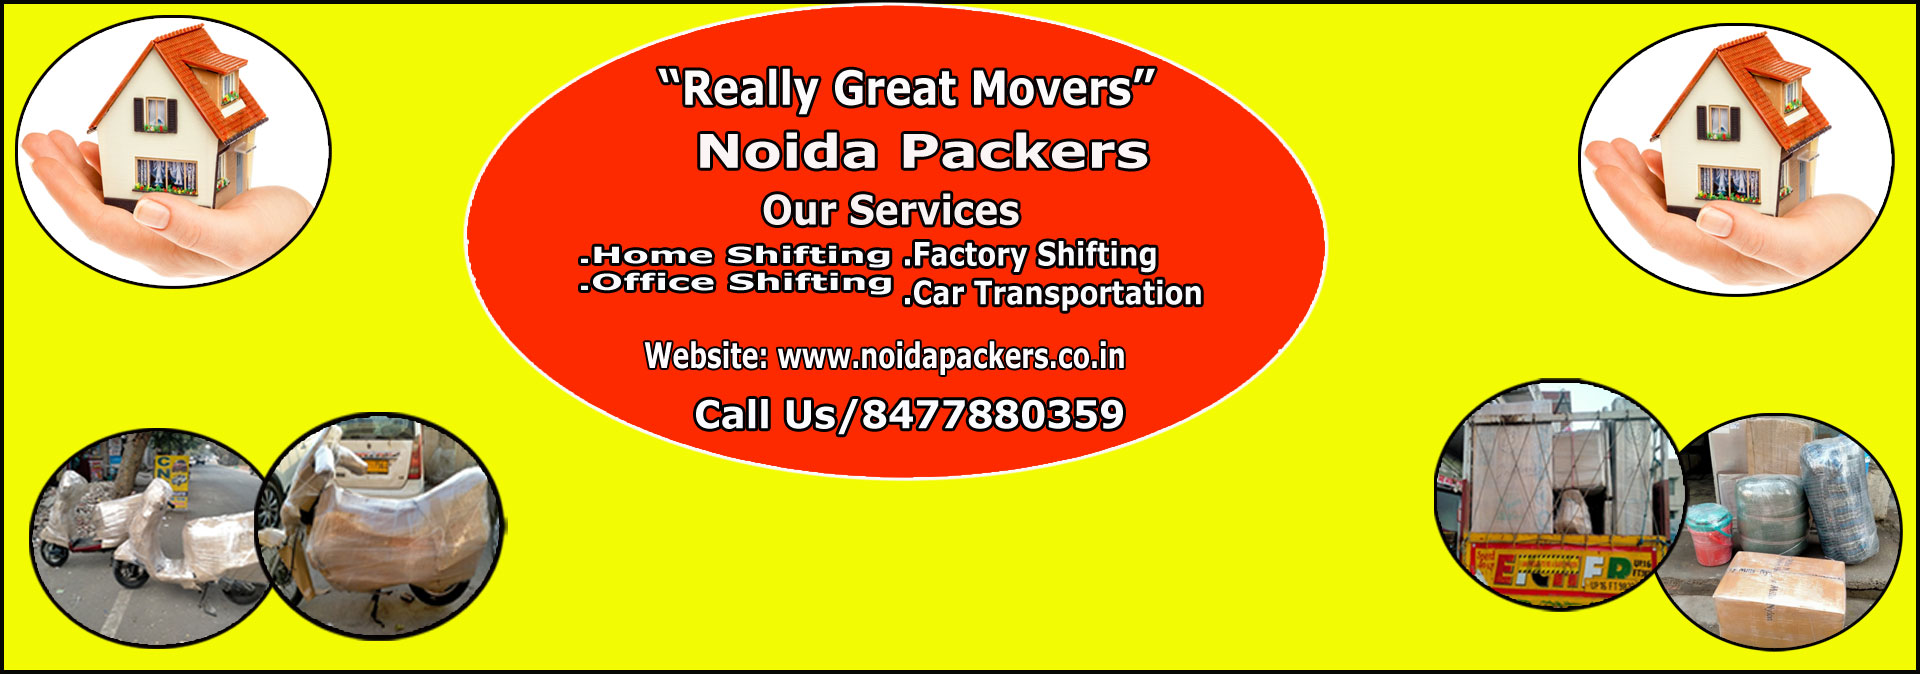 Movers ande Packers Noida Sector 130